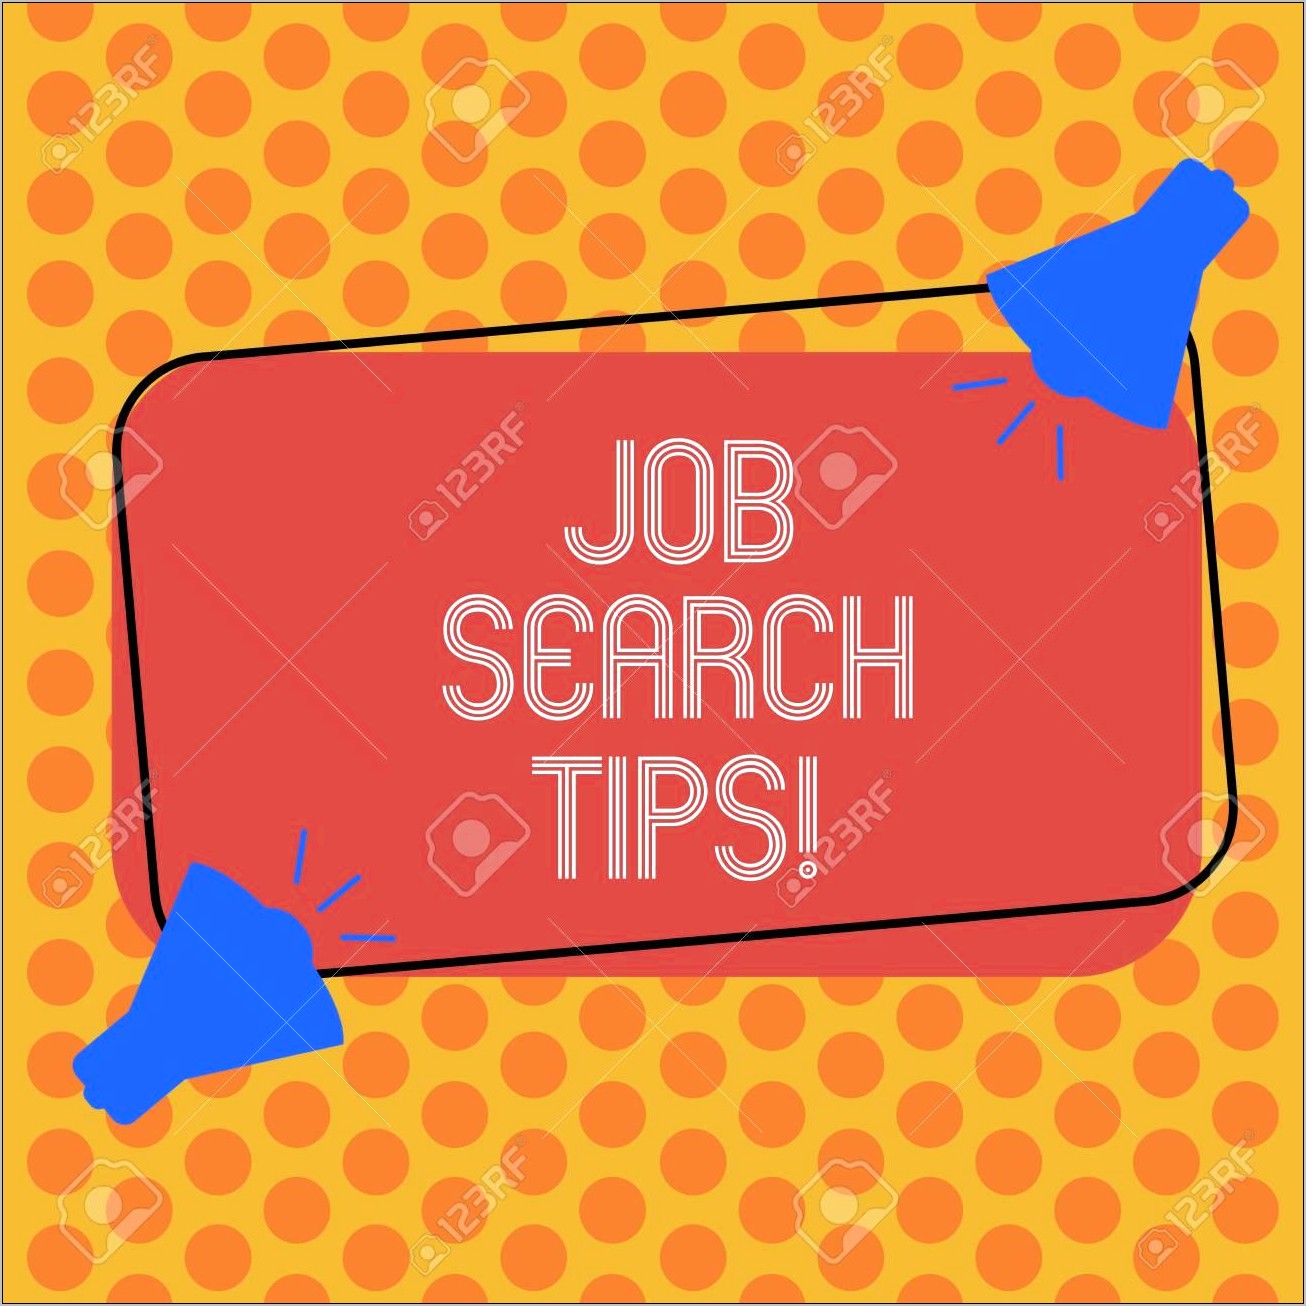 Resume And Job Search Tips